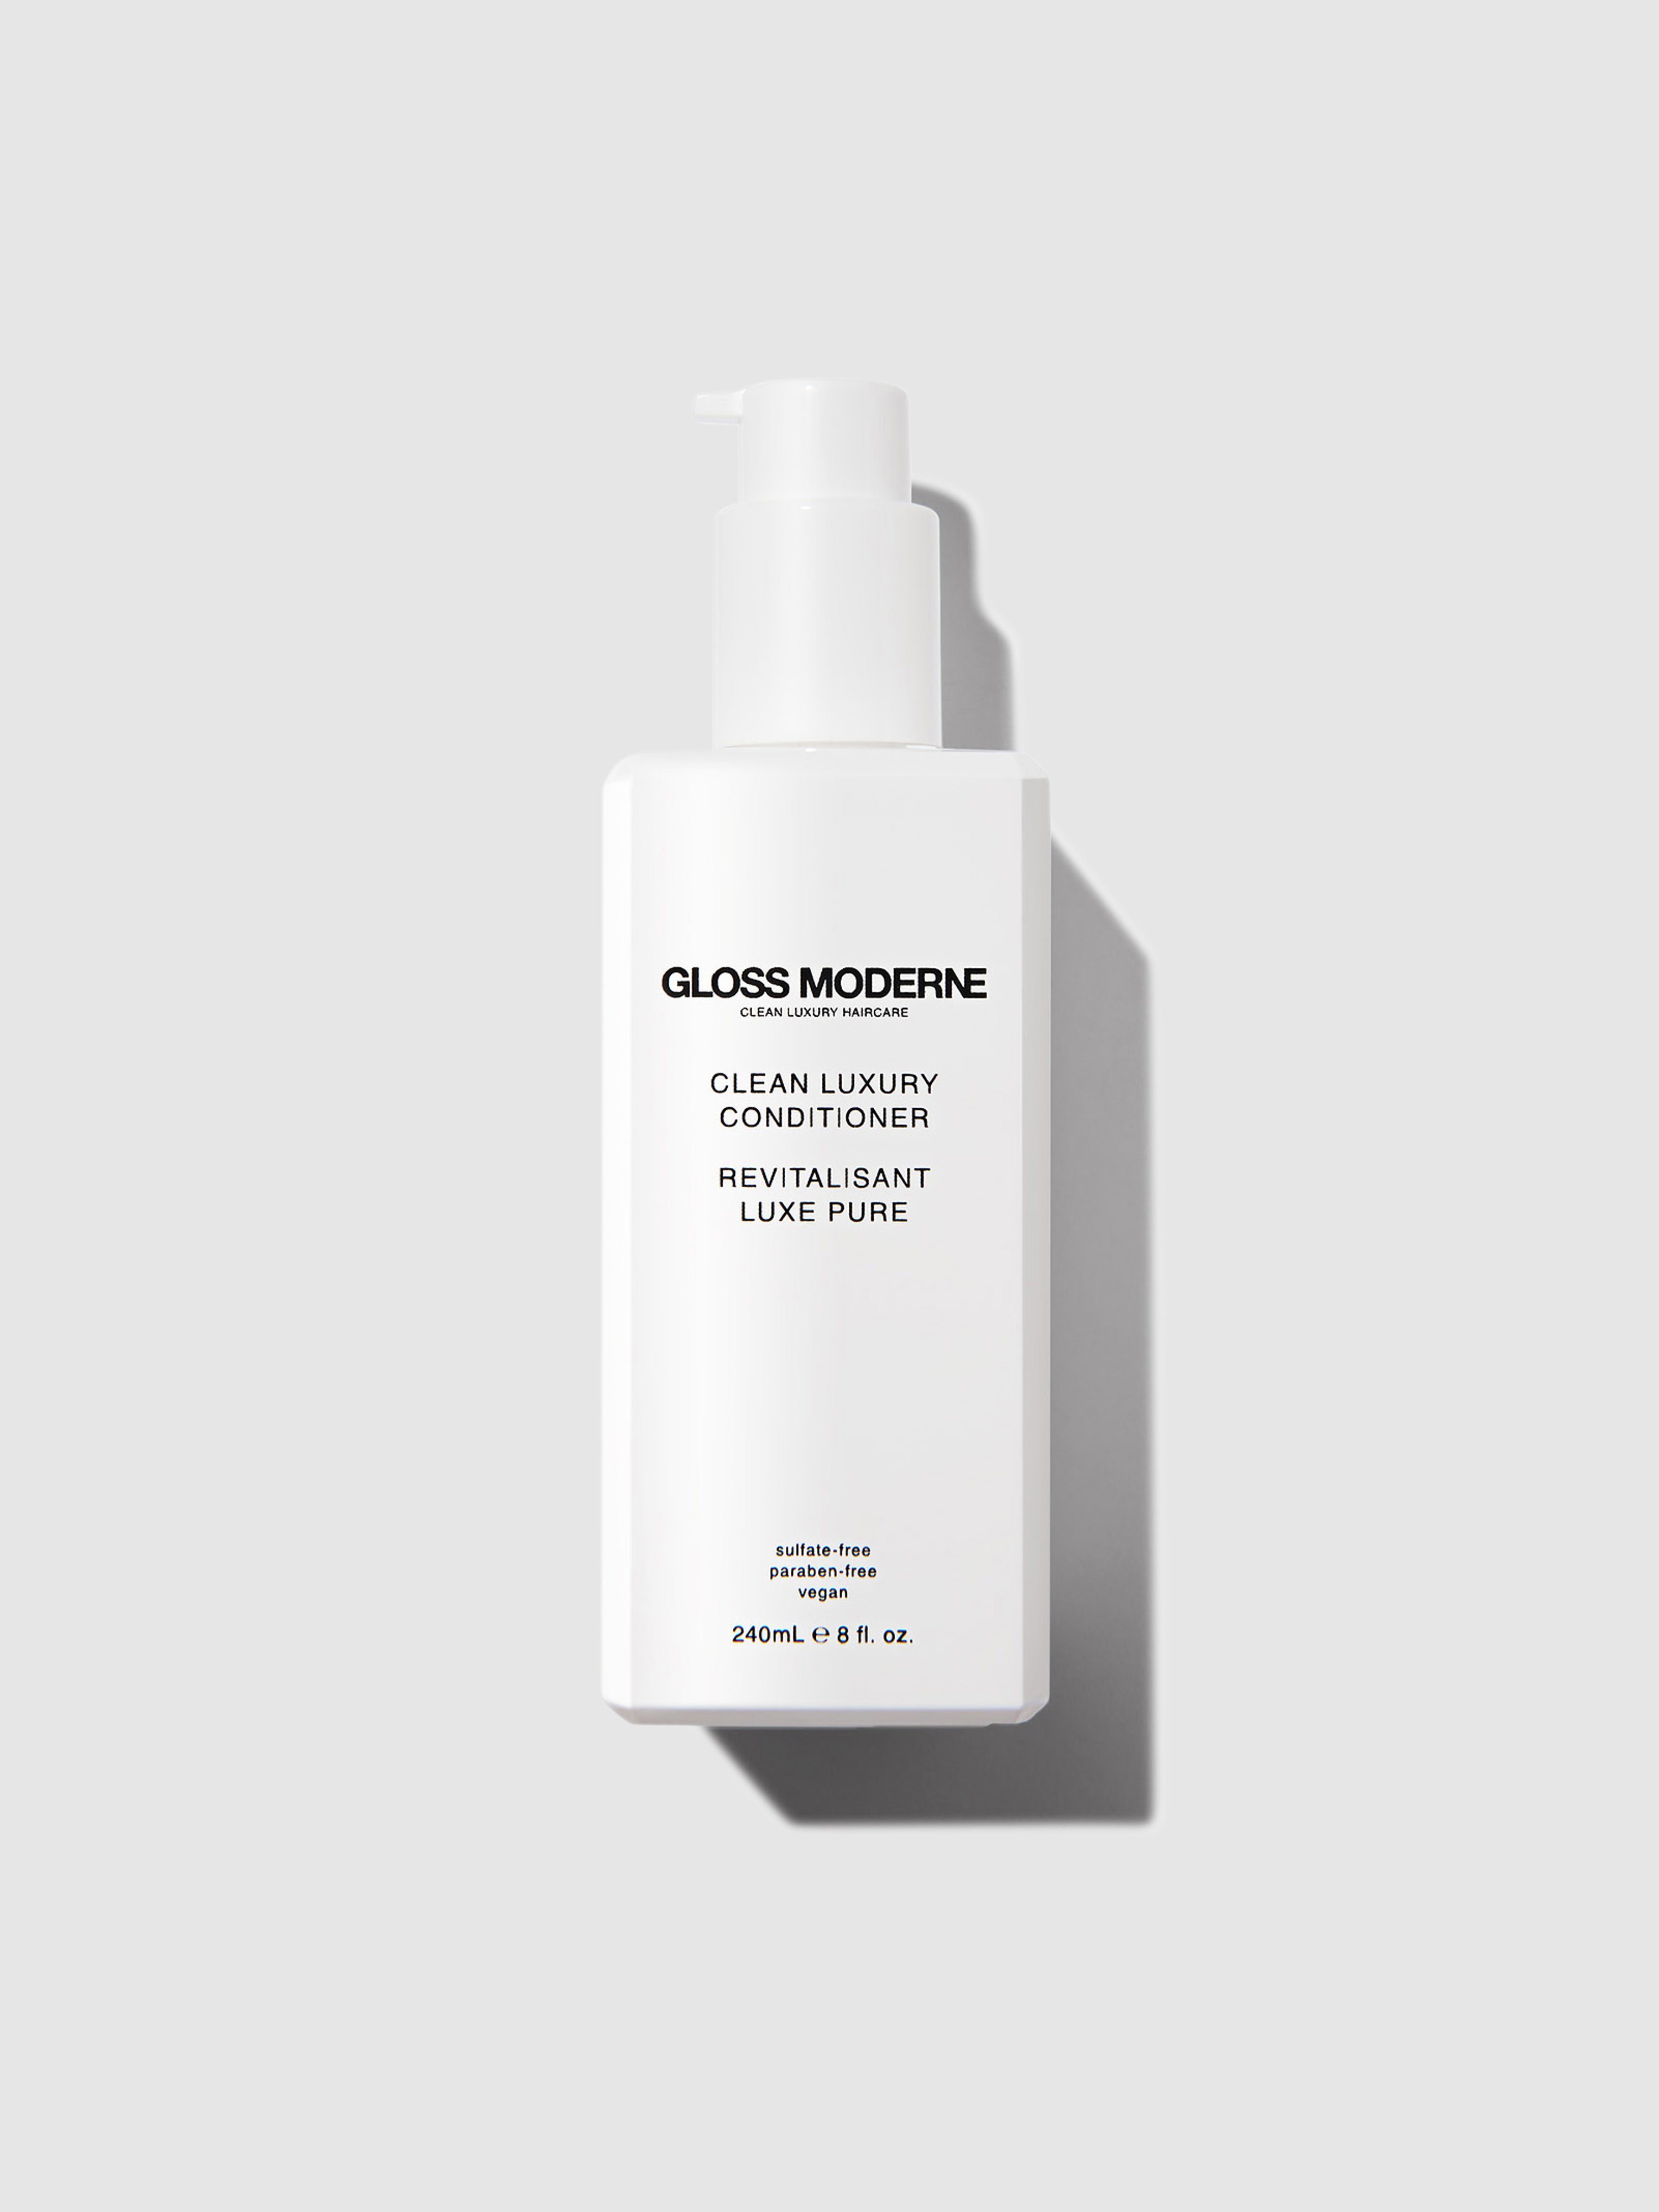 GLOSS MODERNE GLOSS MODERNE CLEAN LUXURY CONDITIONER